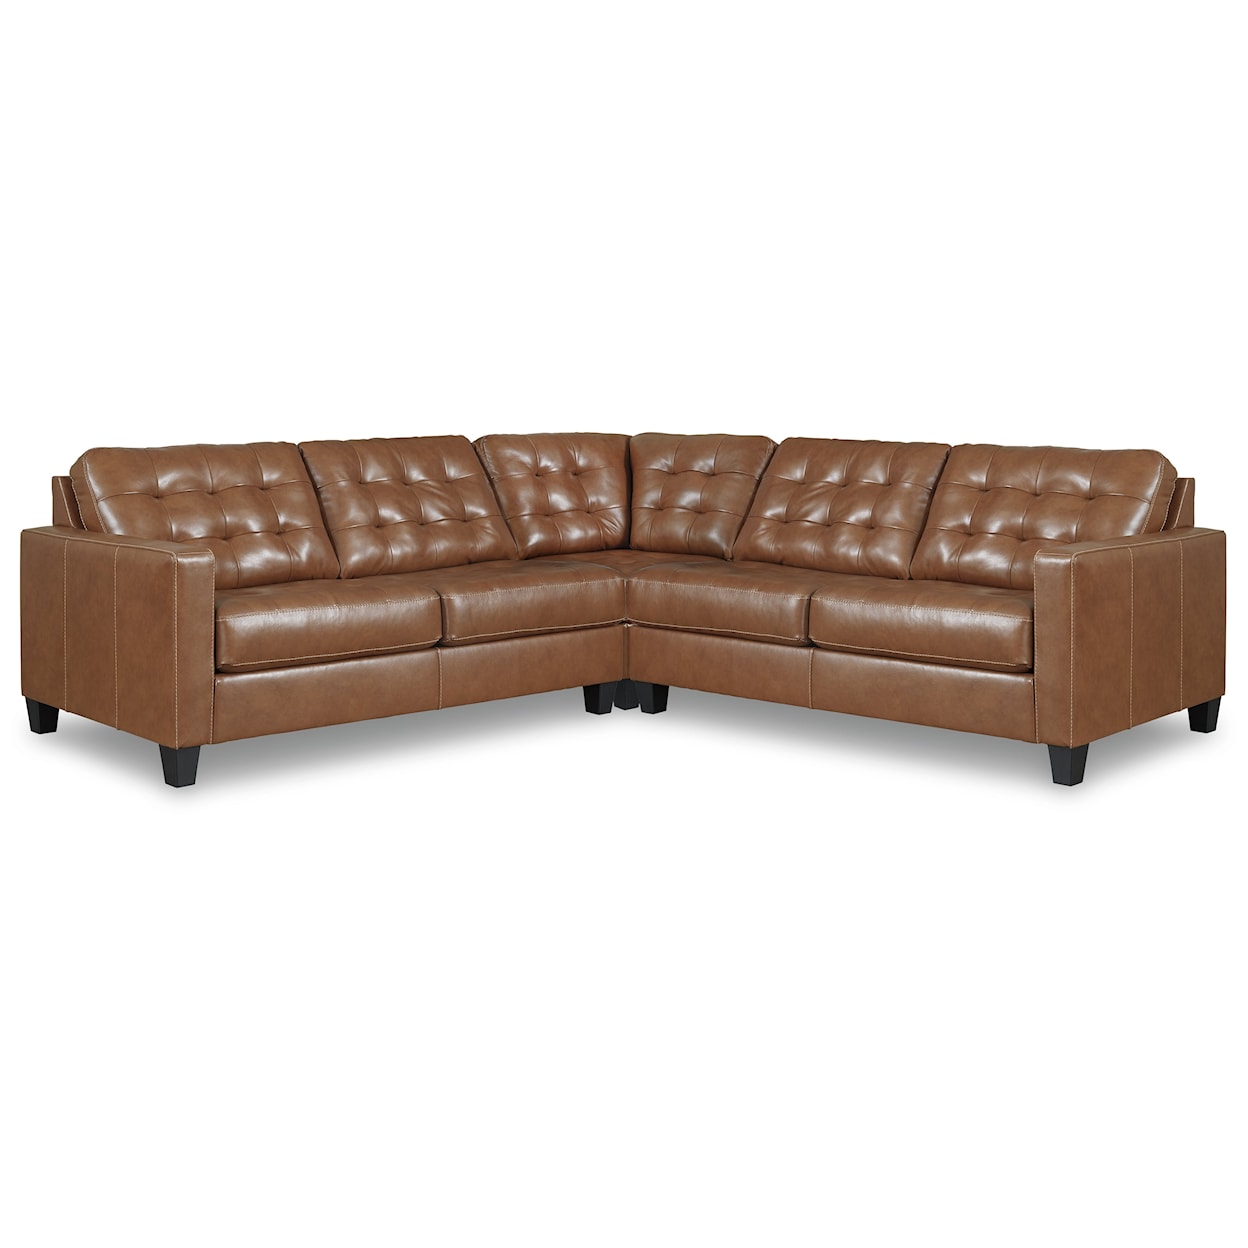 Signature Design by Ashley Baskove 3-Piece Sectional